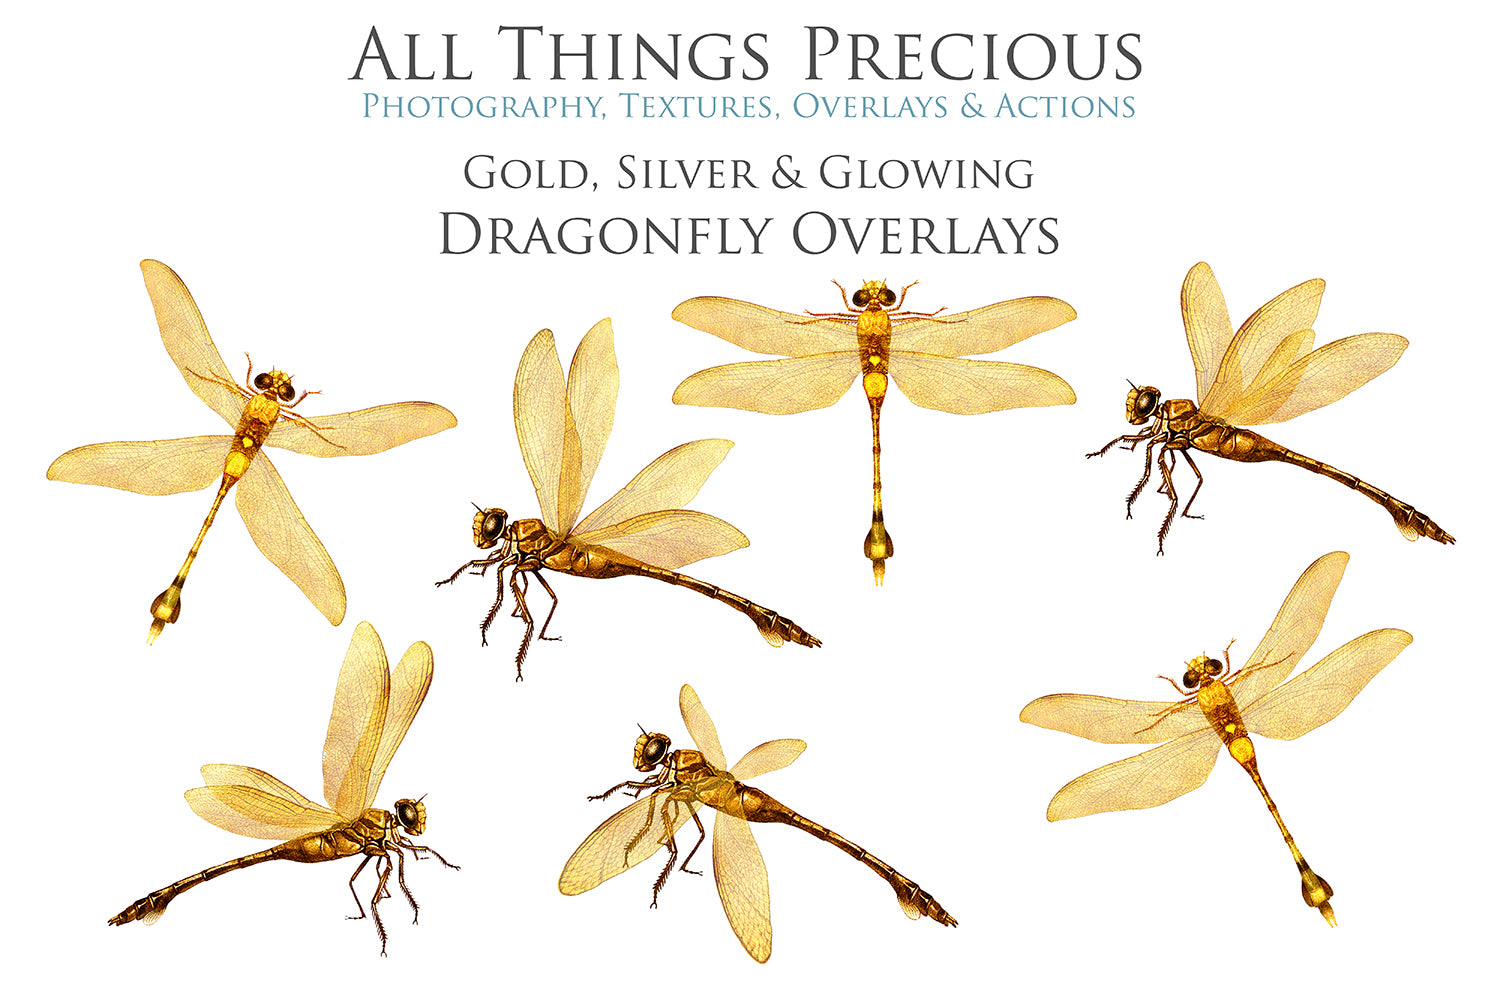 Png, High resolution, overlays for digital photography, scrapbooking and art. Dragonfly overlays, Dragonflies clipart by ATP textures.